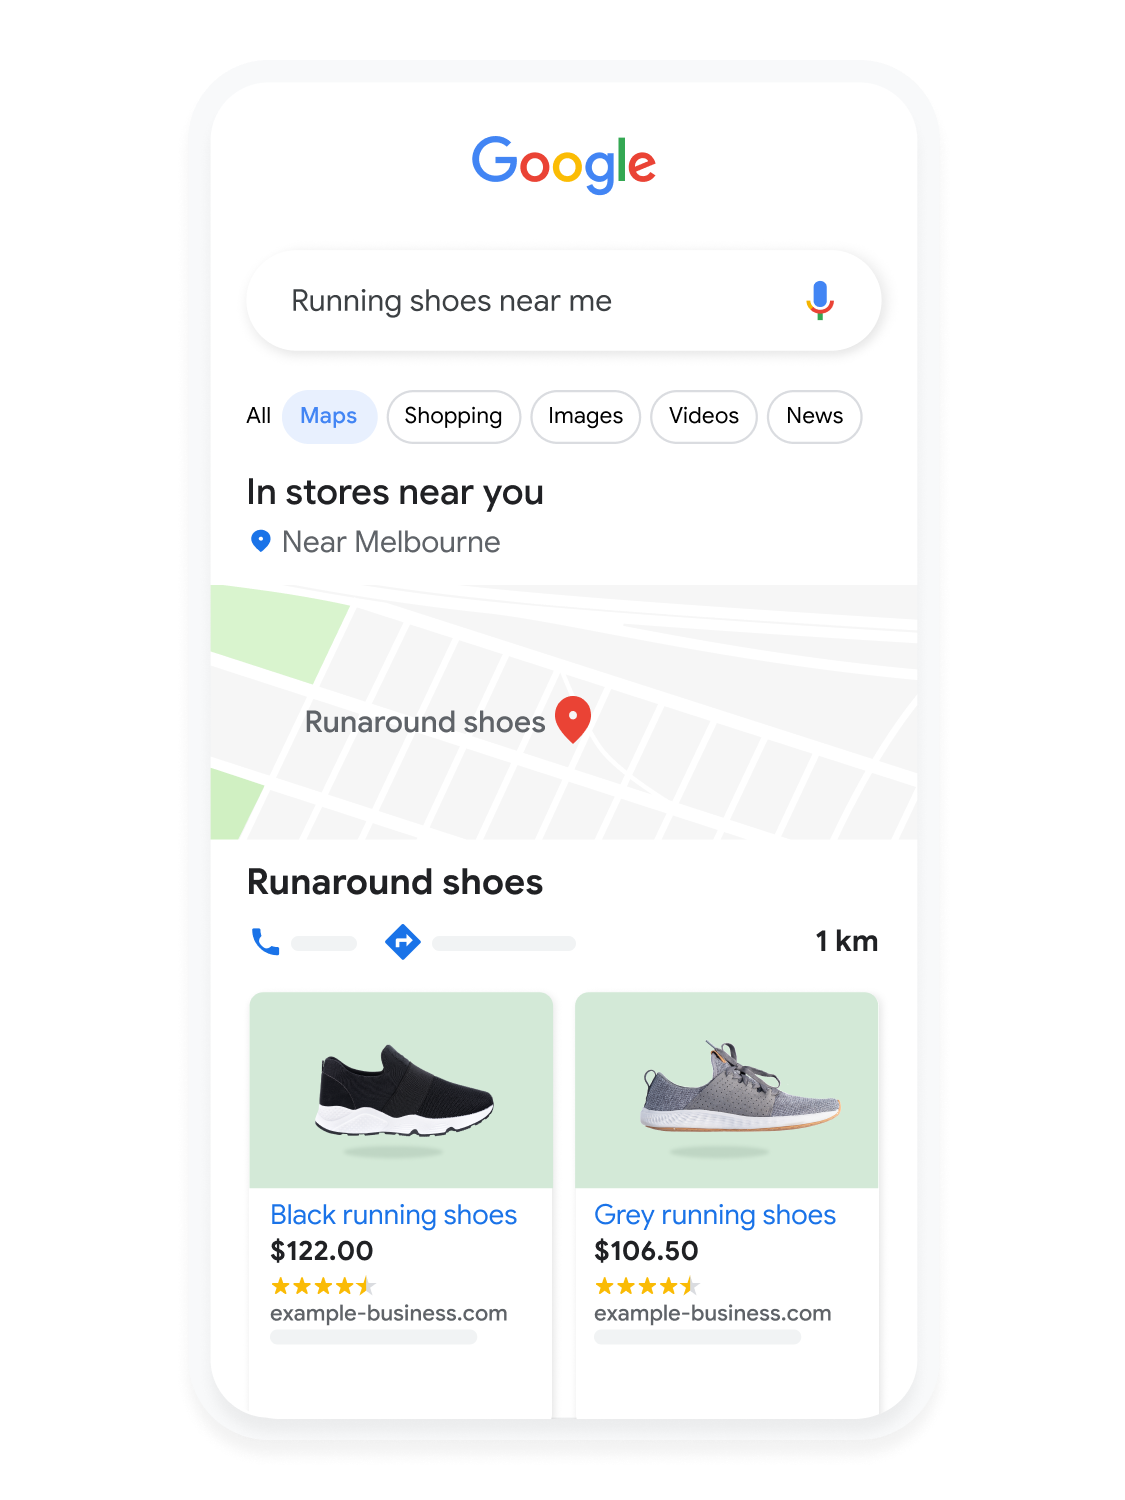 Mobile user interface animated to show a user searching for running shoes on Google Maps.